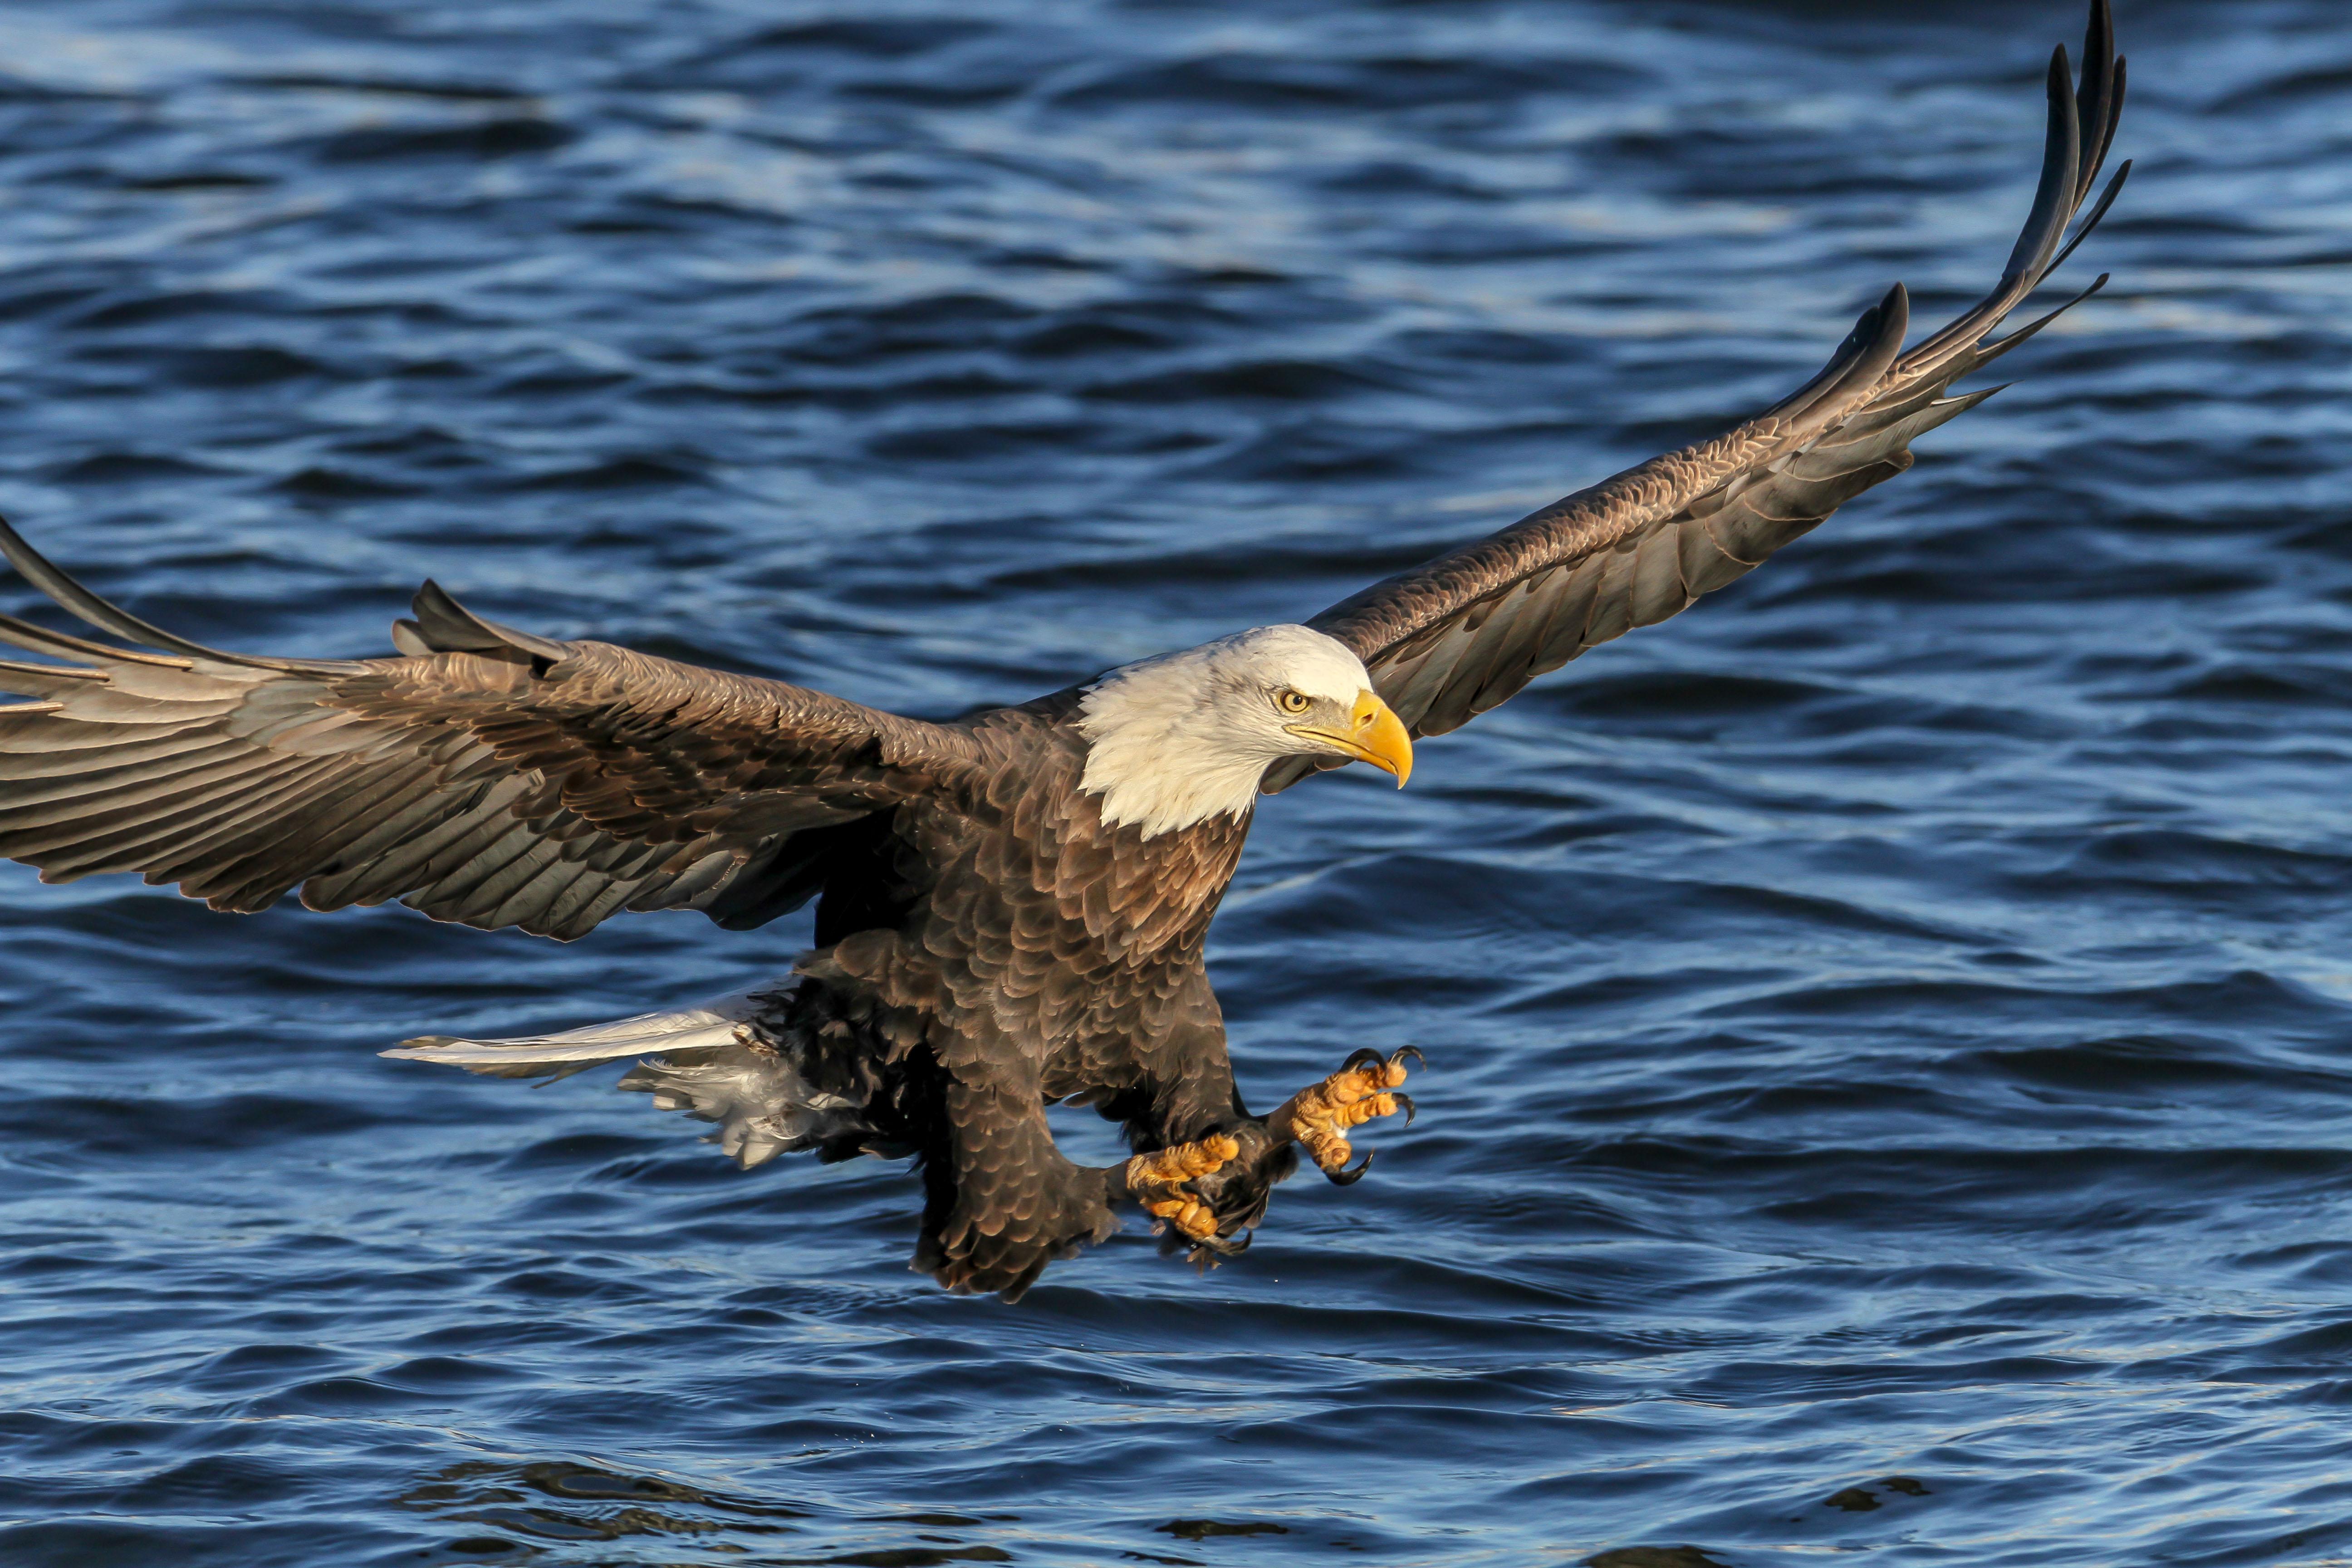 A bald eagle fishing on the Mississippi River. (Photo credit: Josh Feeney)